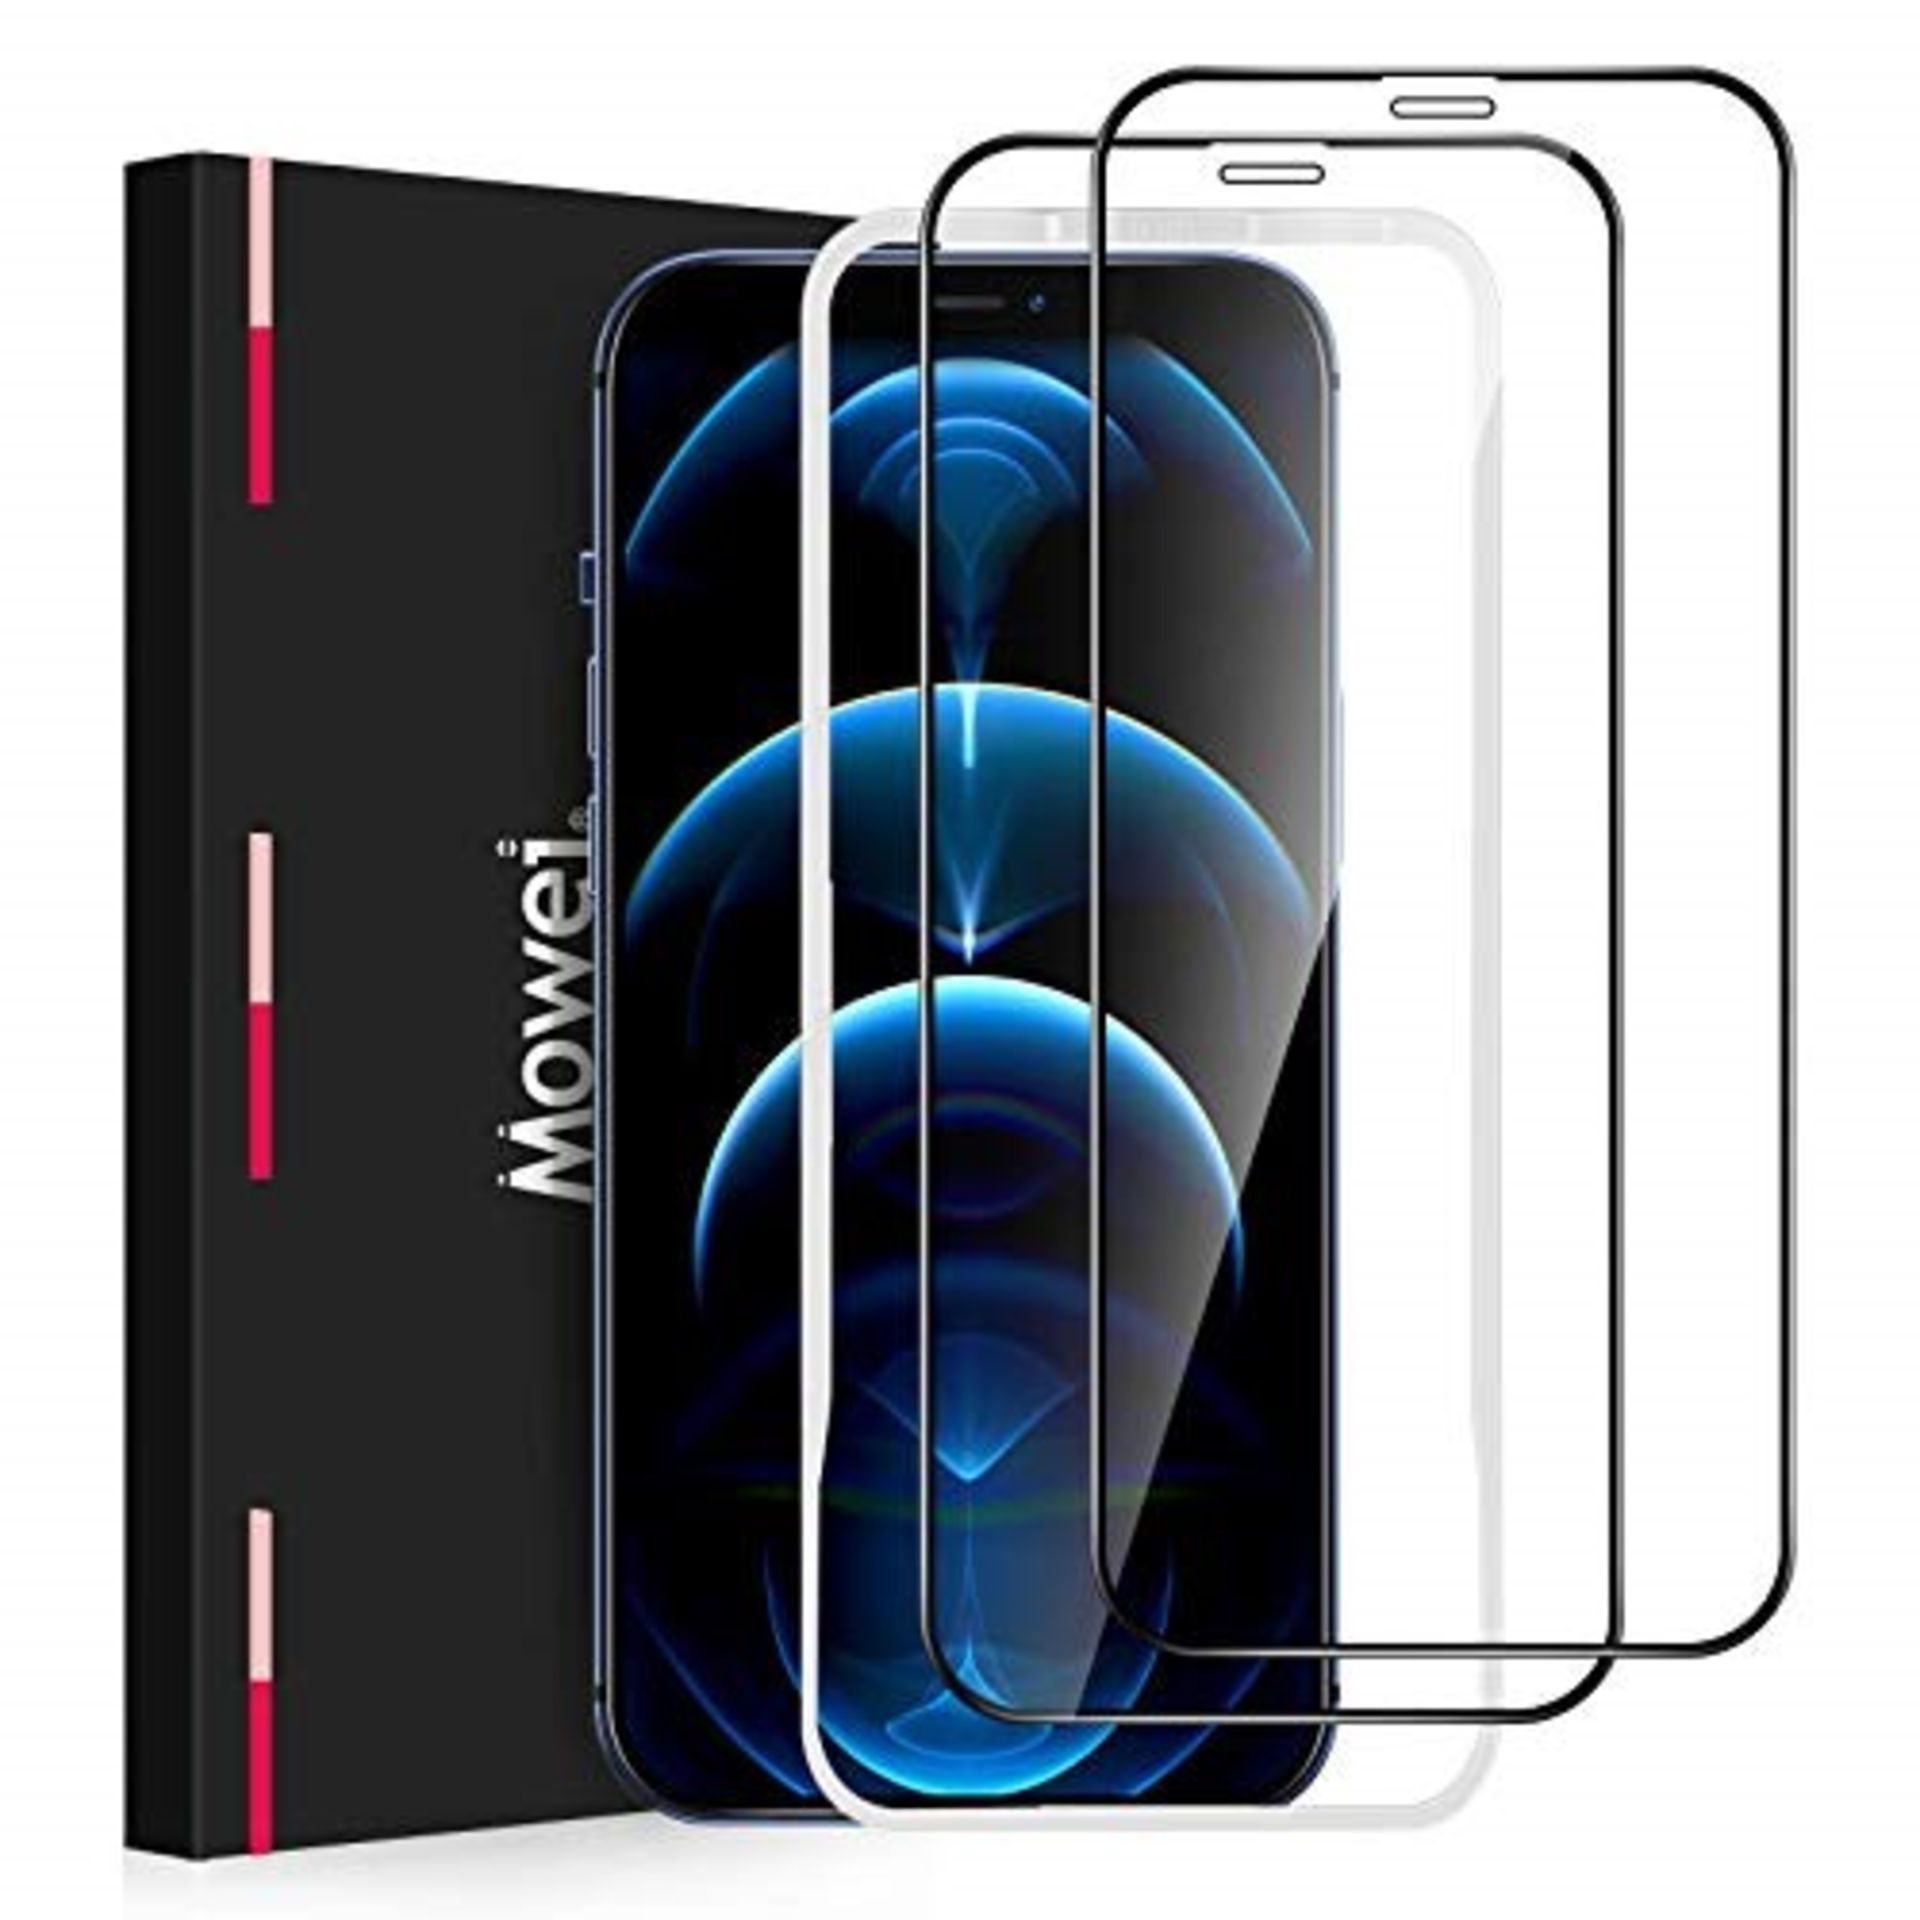 Mowei 2-Pack Compatible with iPhone 12 Pro Max Screen Protector, [Alignment Tool] Ultr